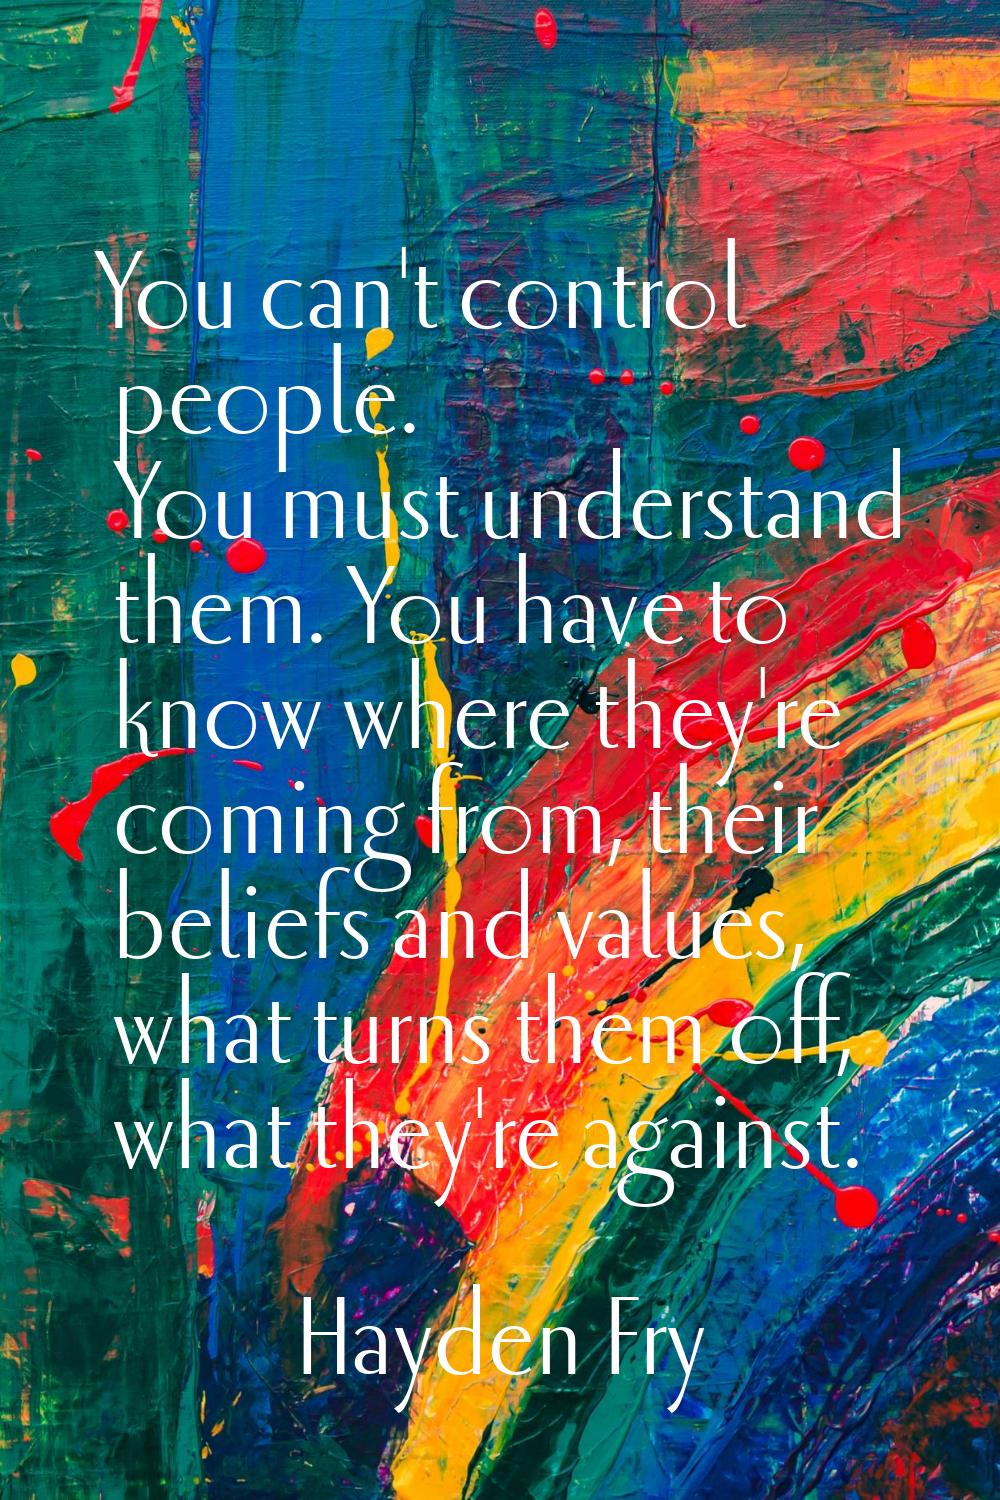 You can't control people. You must understand them. You have to know where they're coming from, the